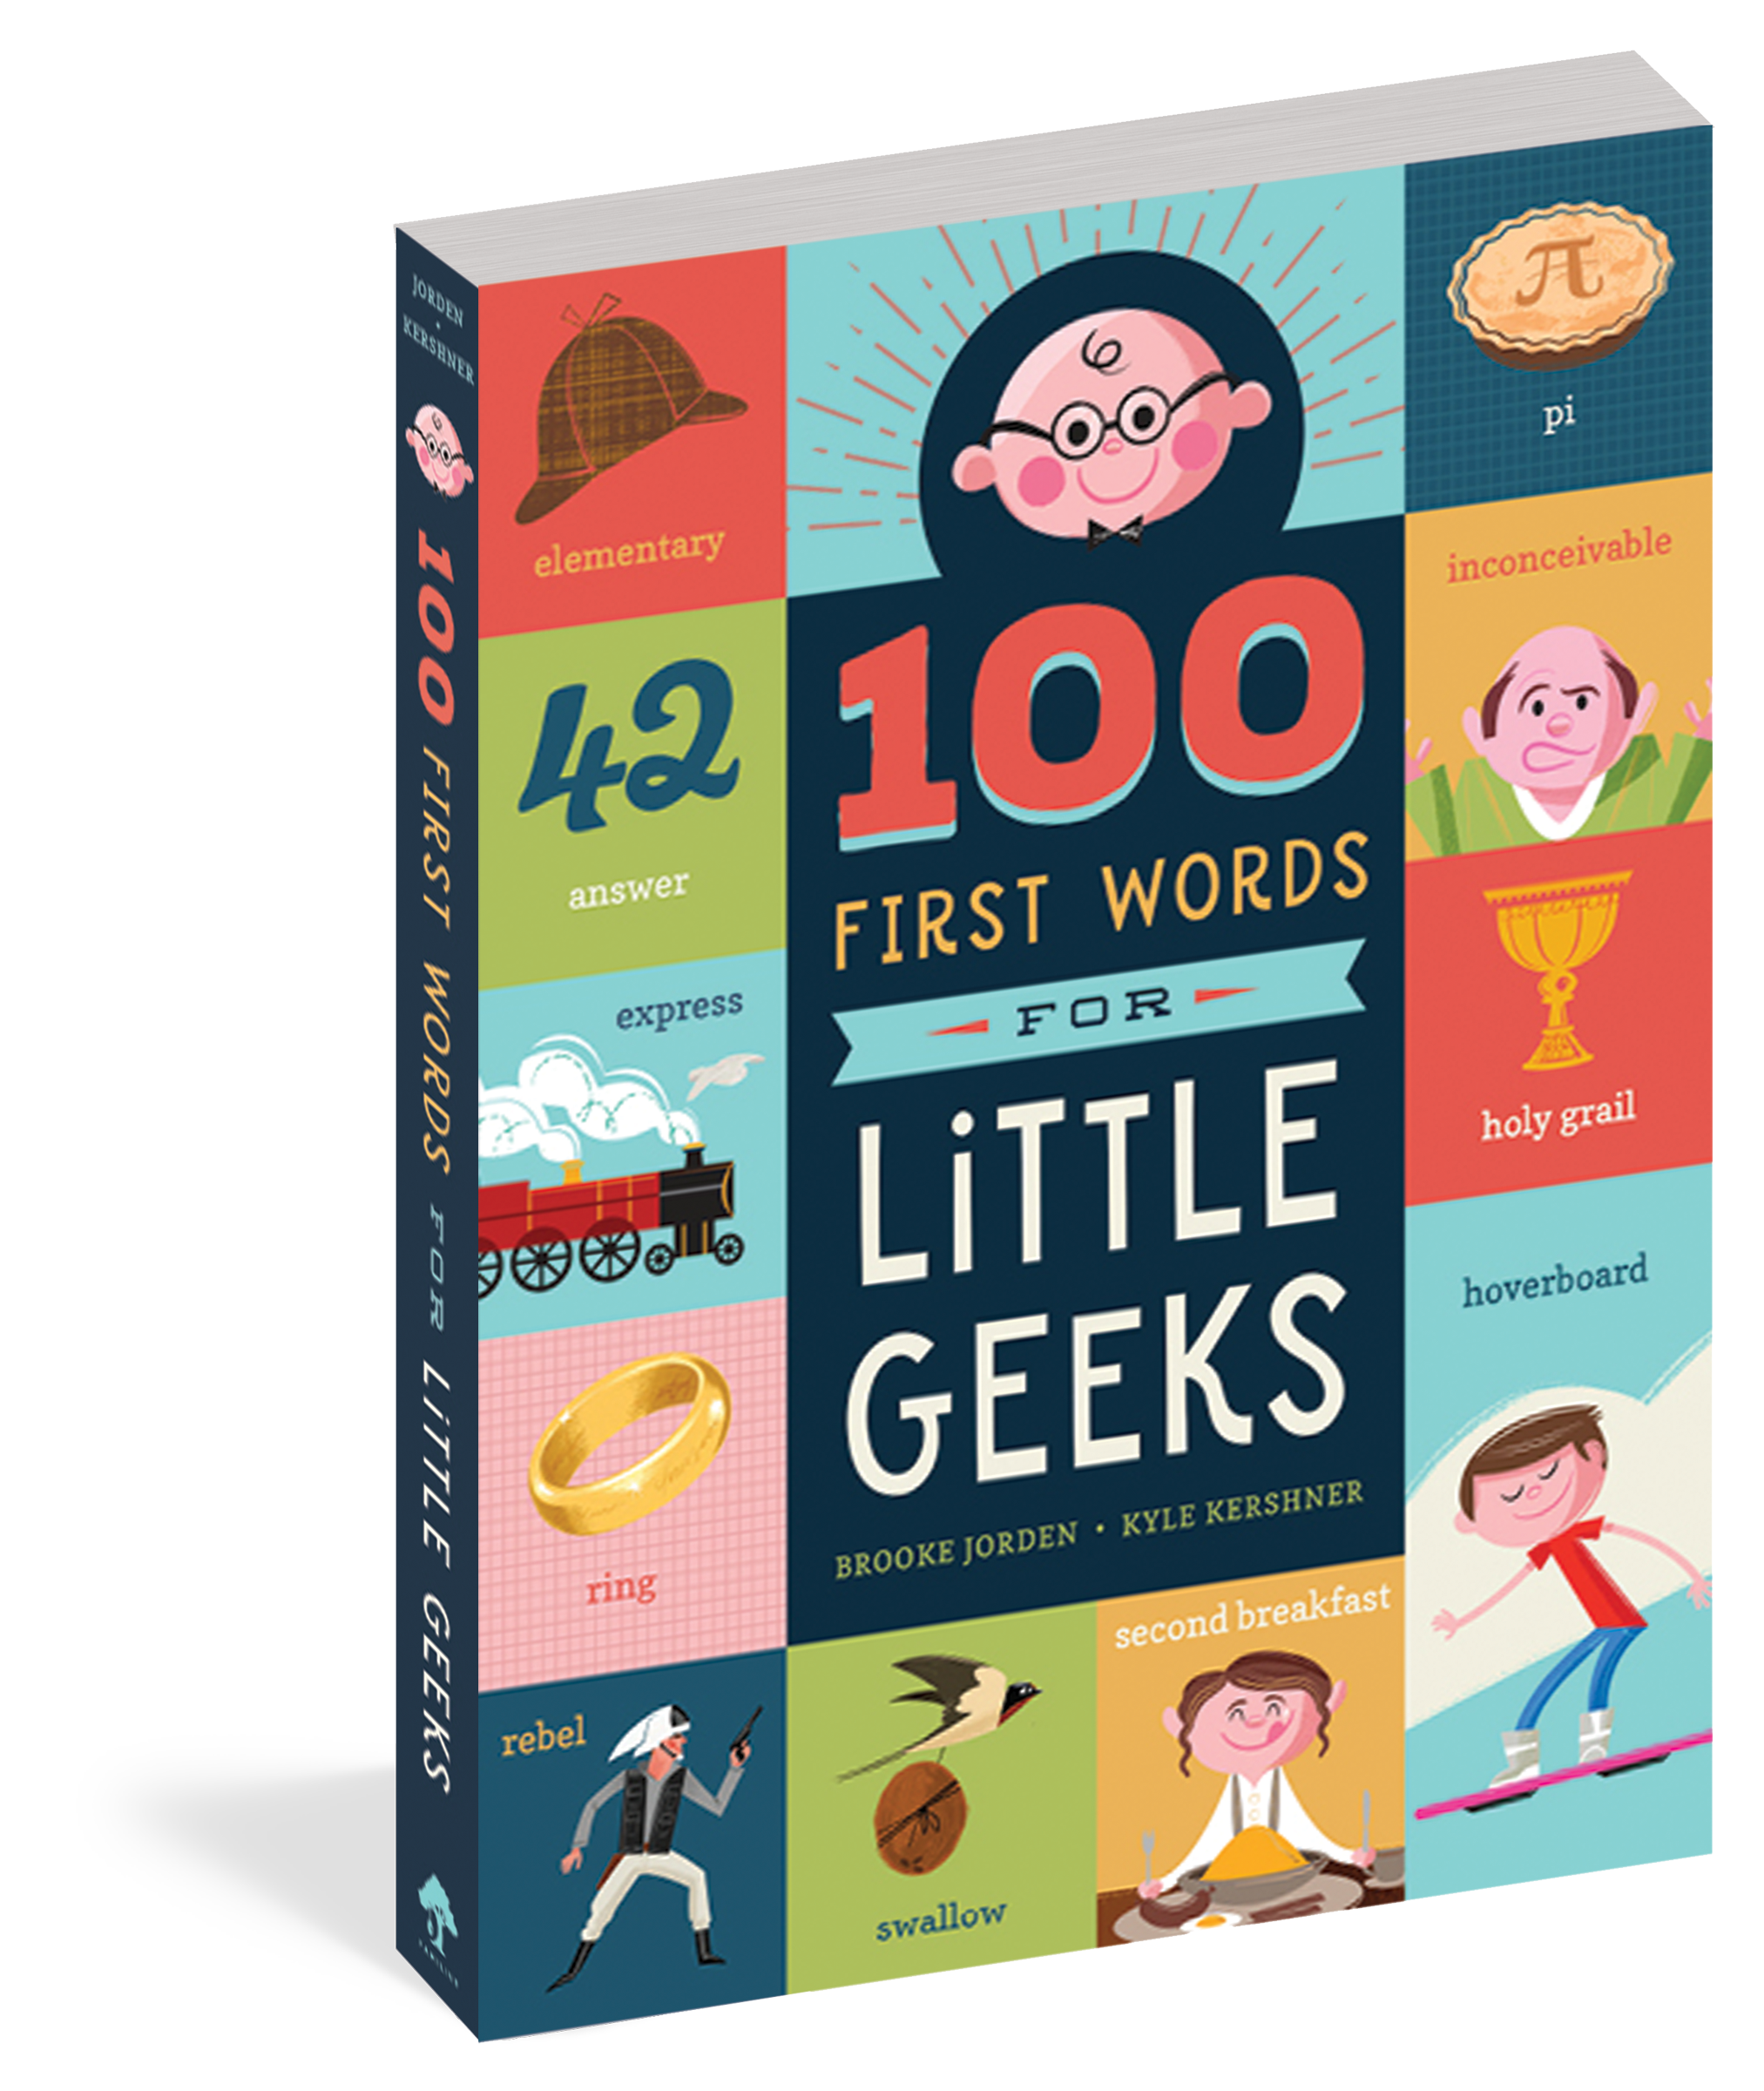 The cover of the board book 100 First Words for Little Geeks.